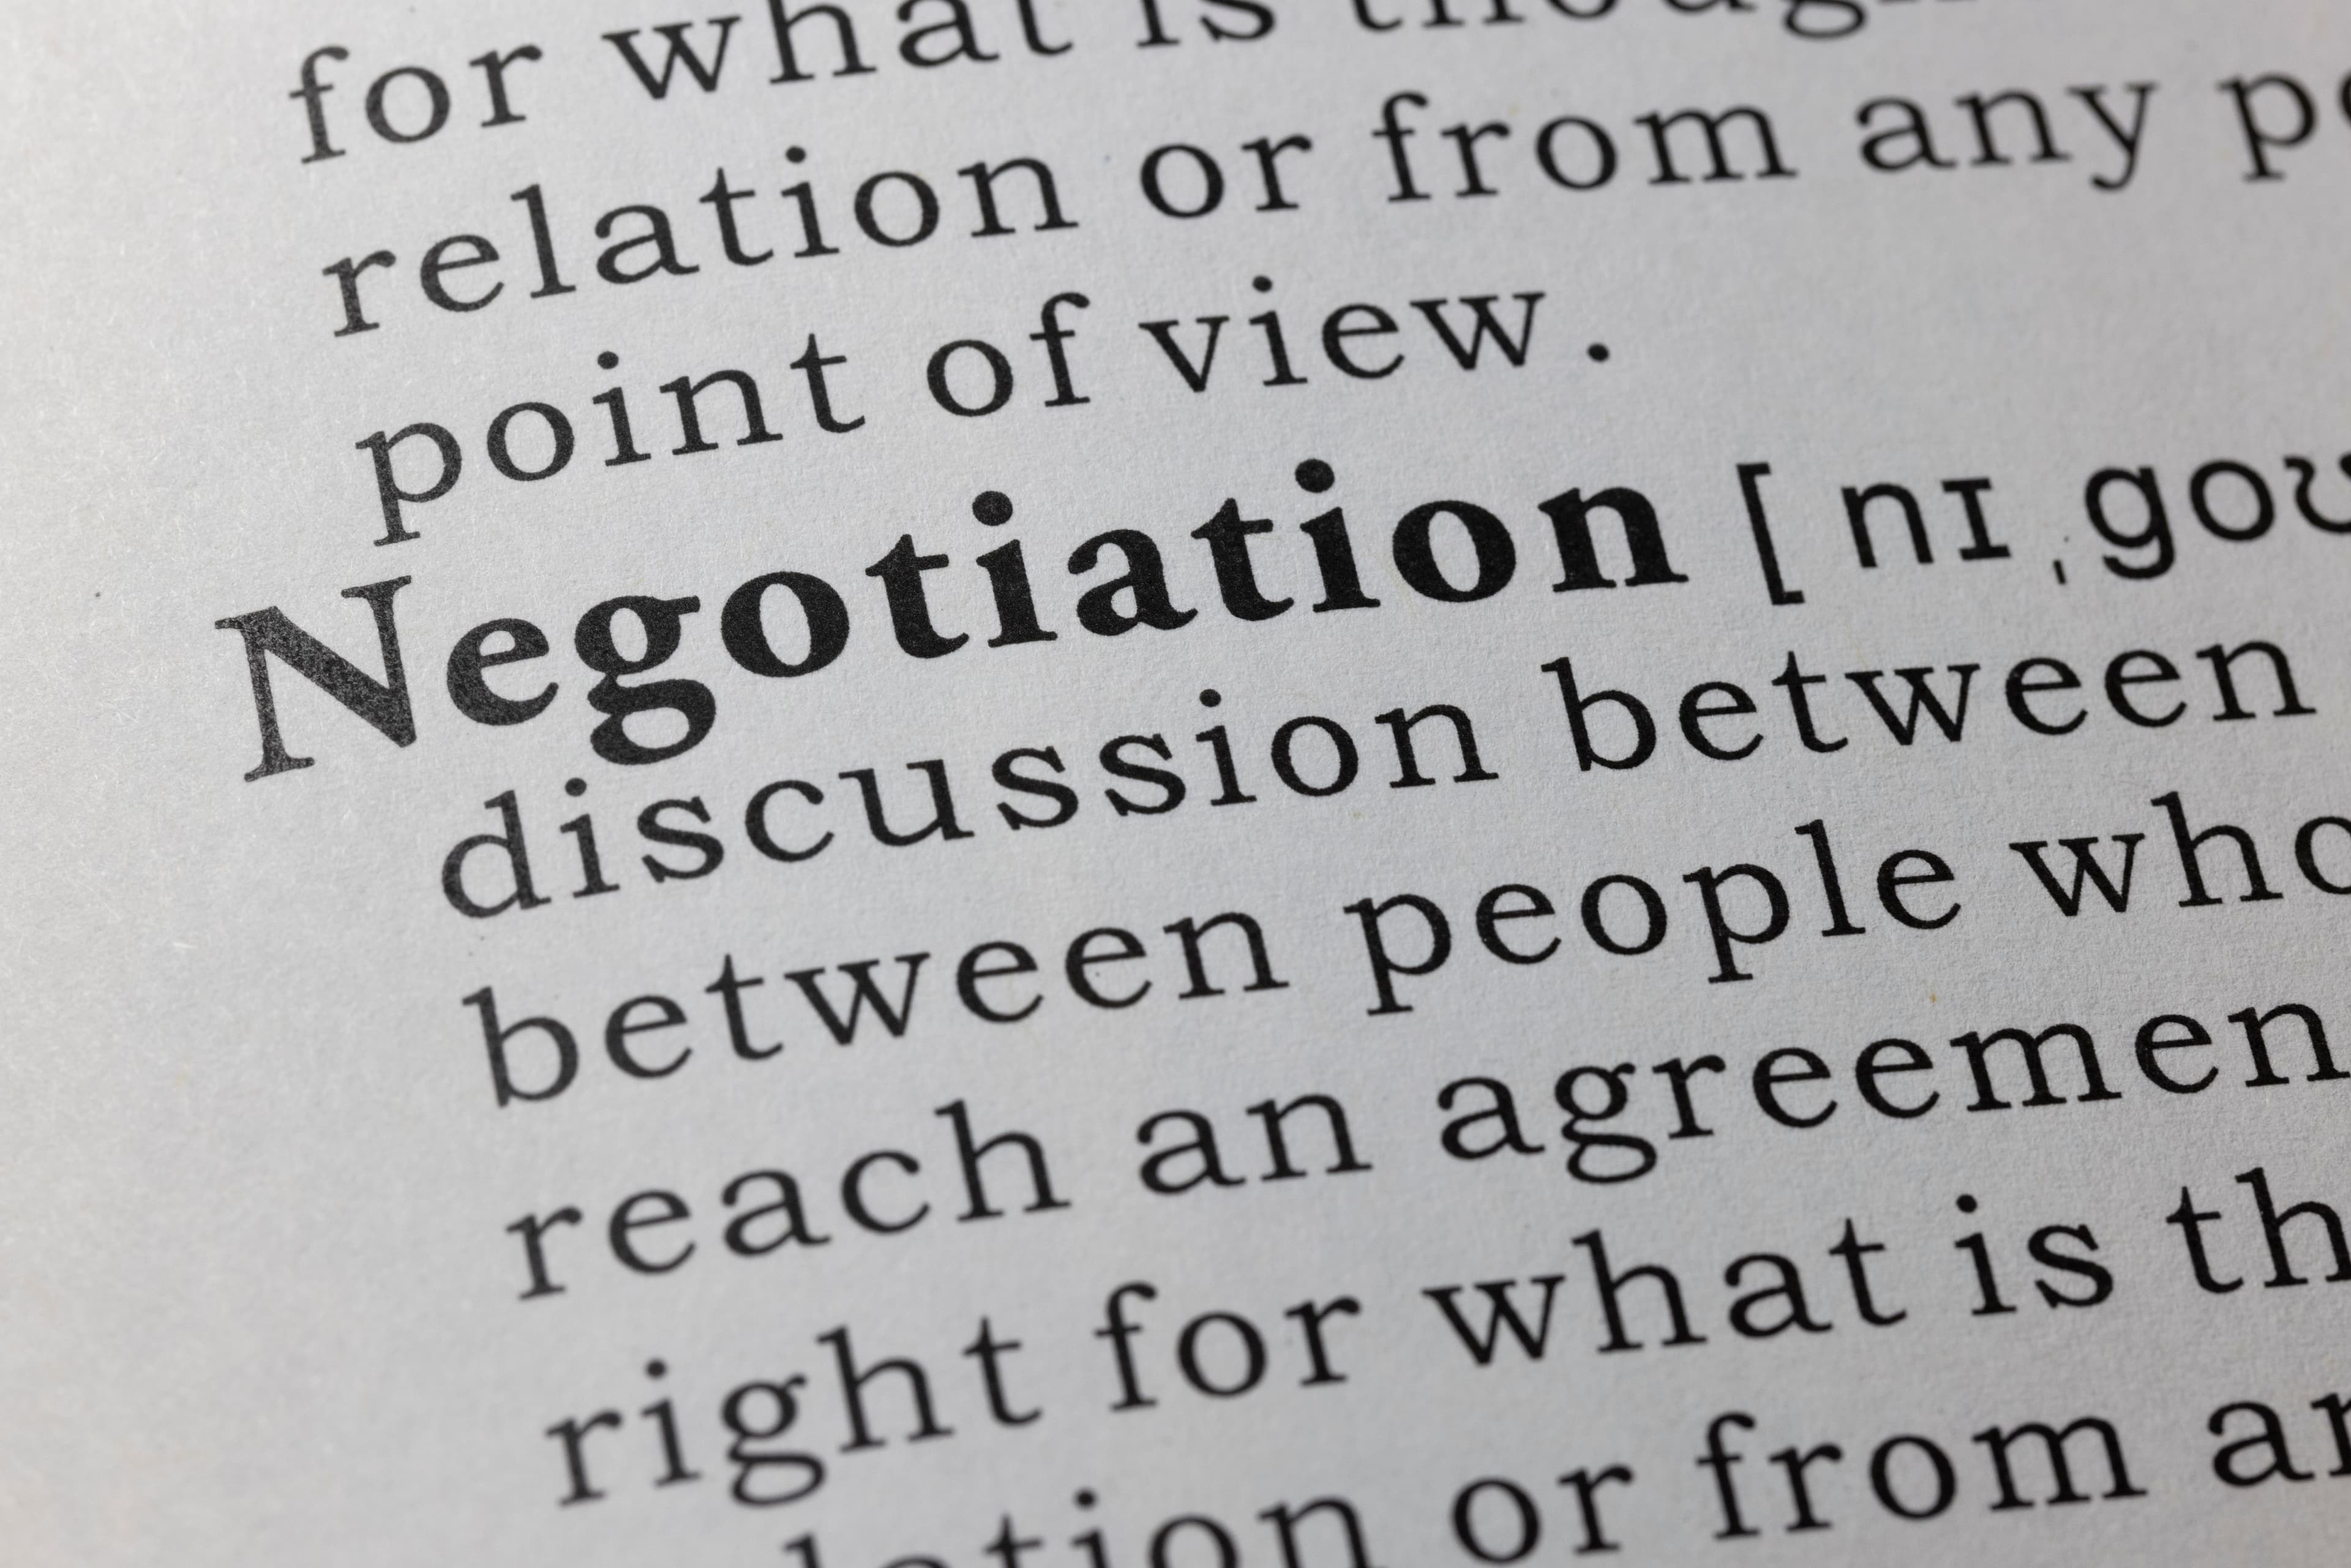 New Job Offer? Here’s What to Negotiate On (Negotiating Part 2)